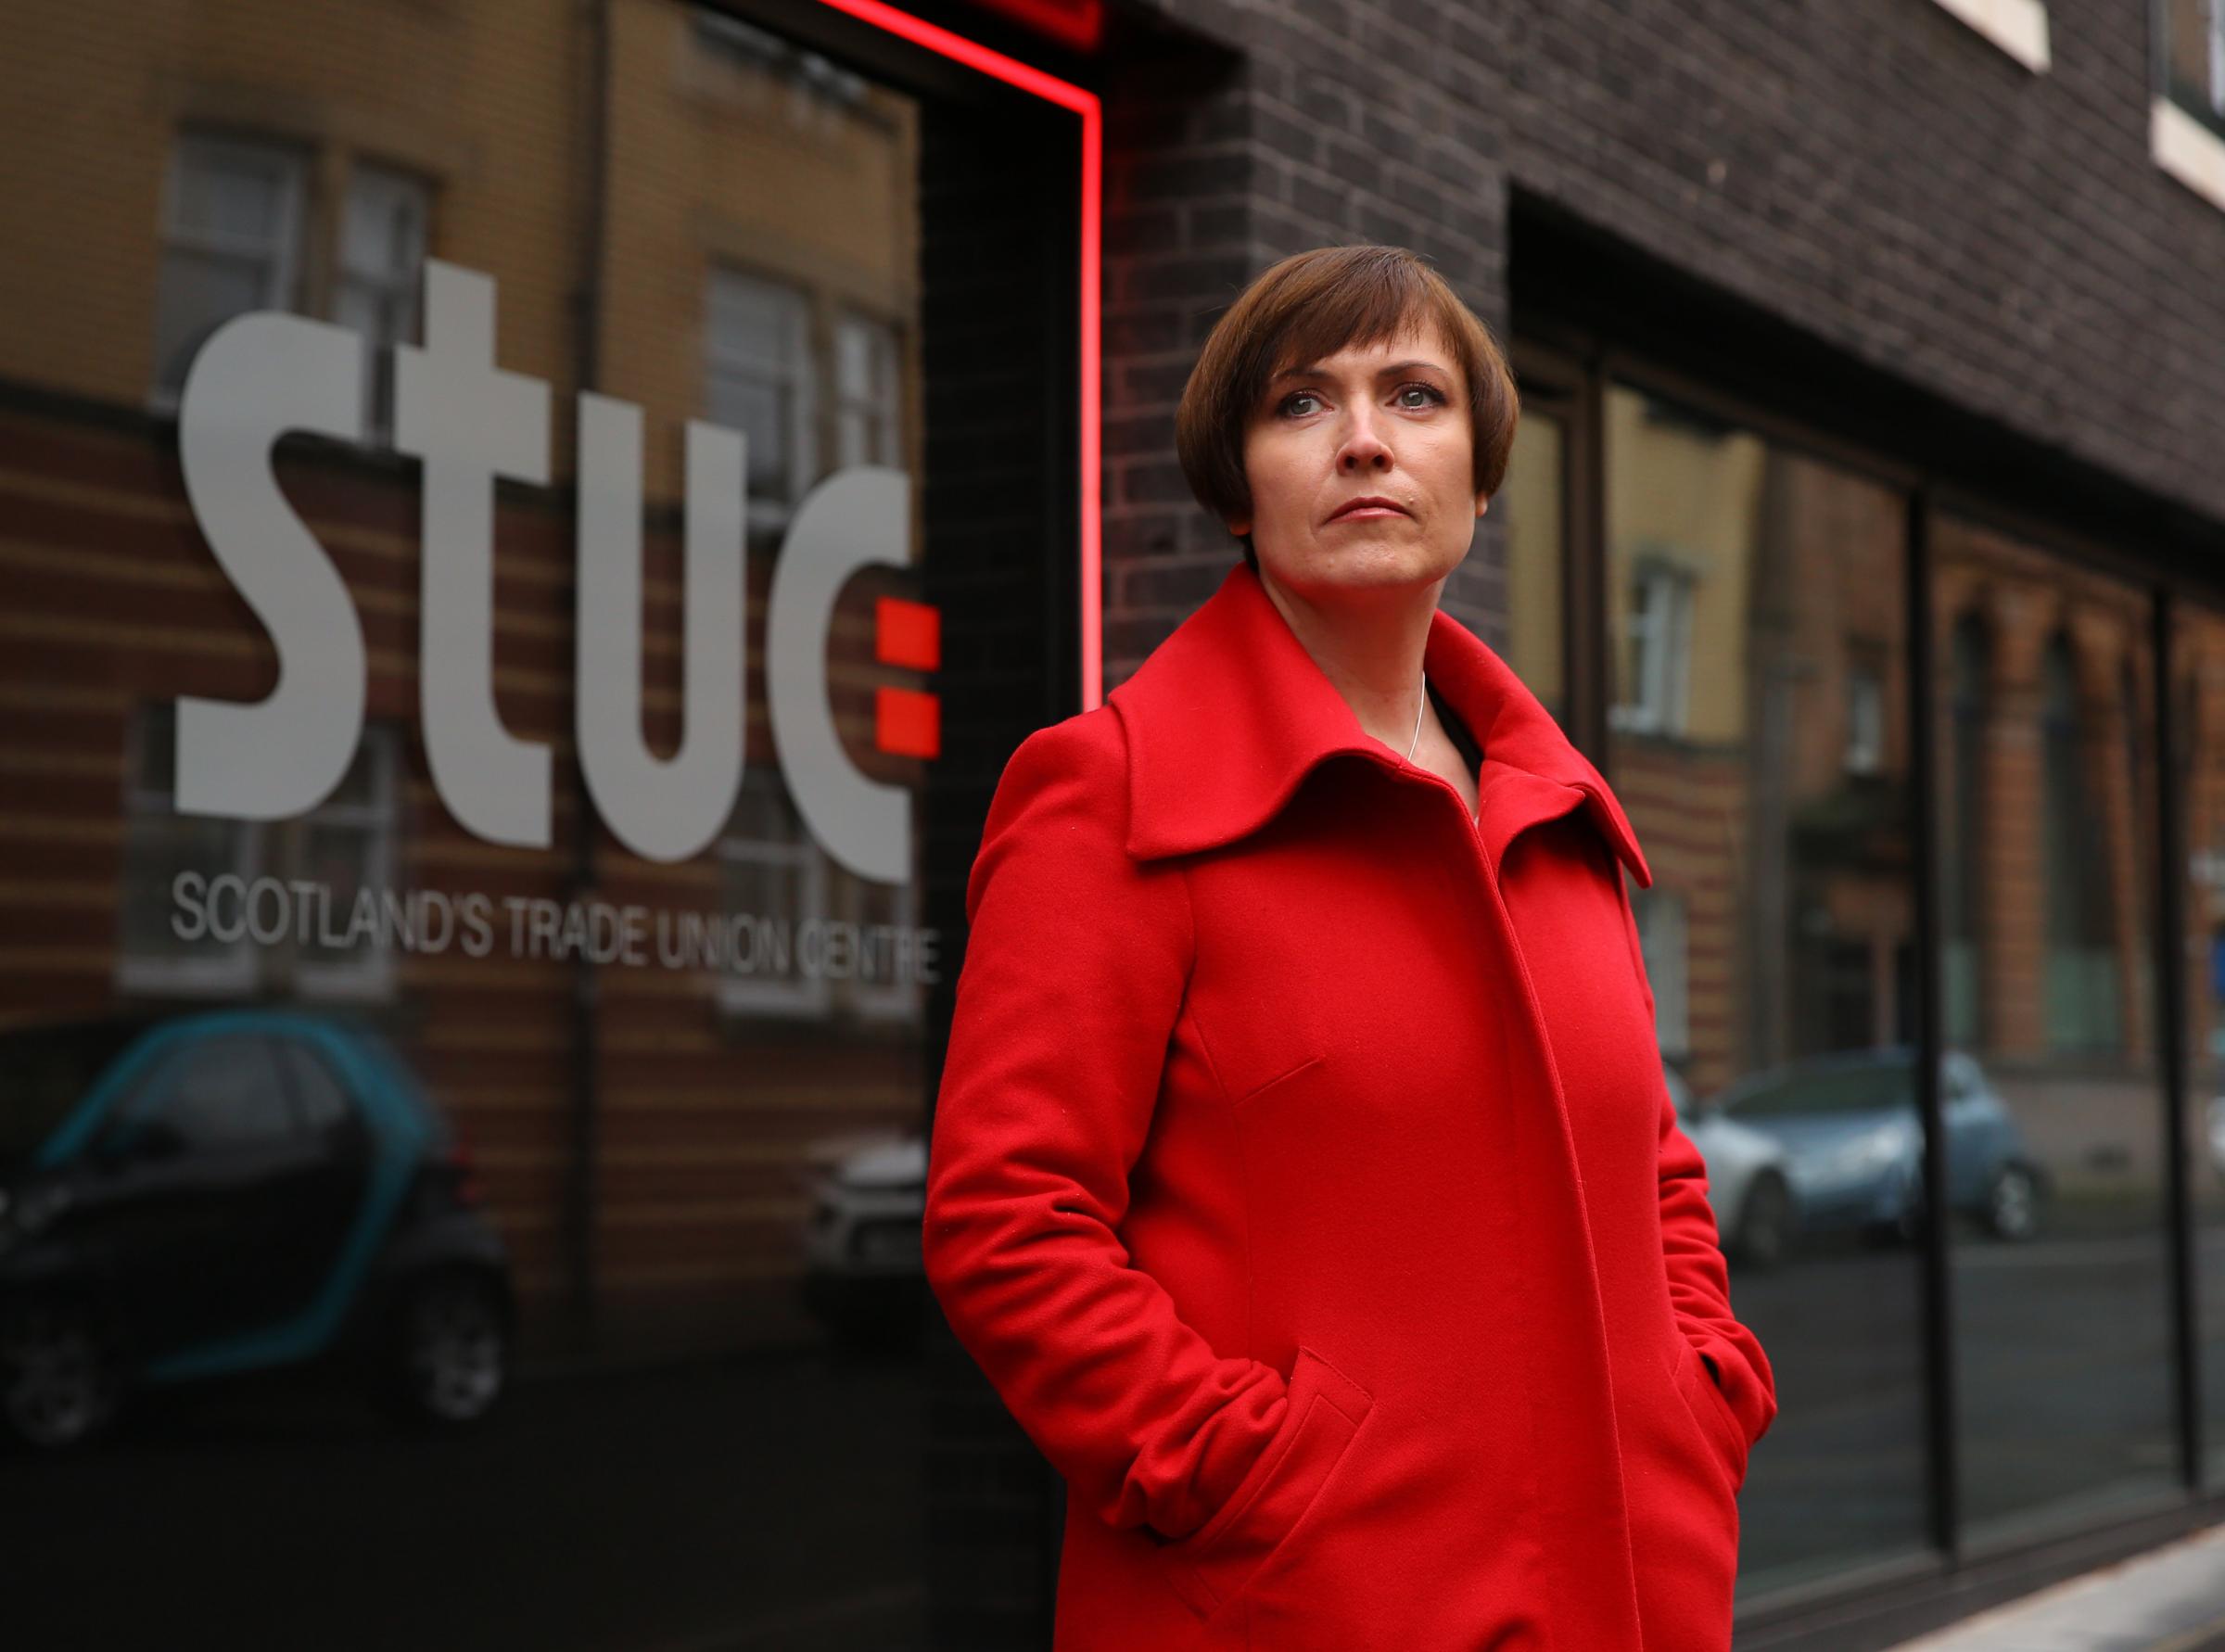 STUC leader: 'The cost of living will crush us — and Scottish independence won't help'